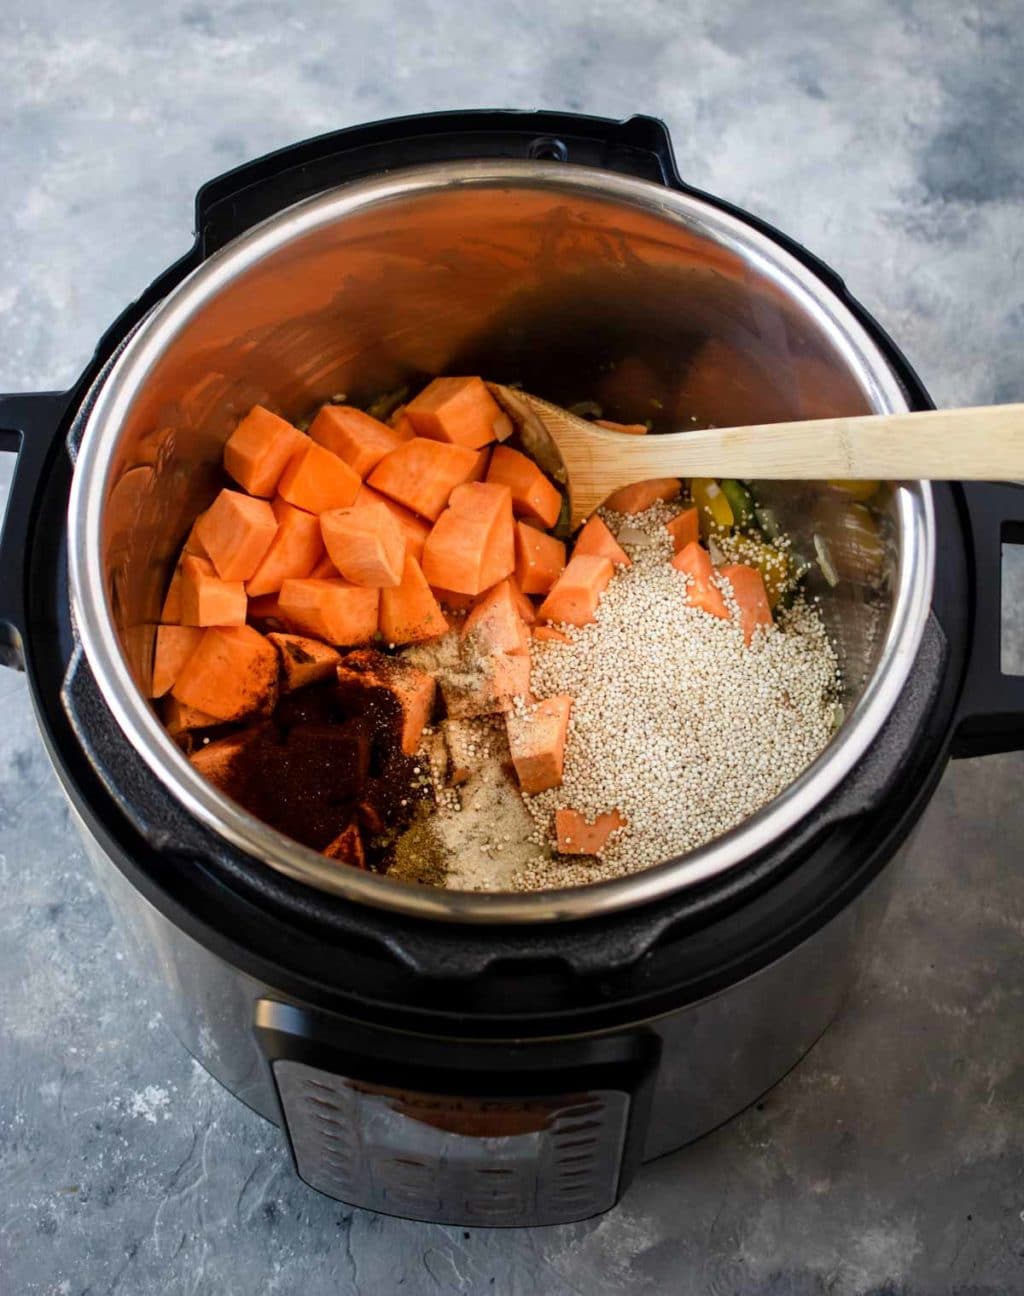 Sweet Potatoes, Quinoa, and spices in the Instant Pot